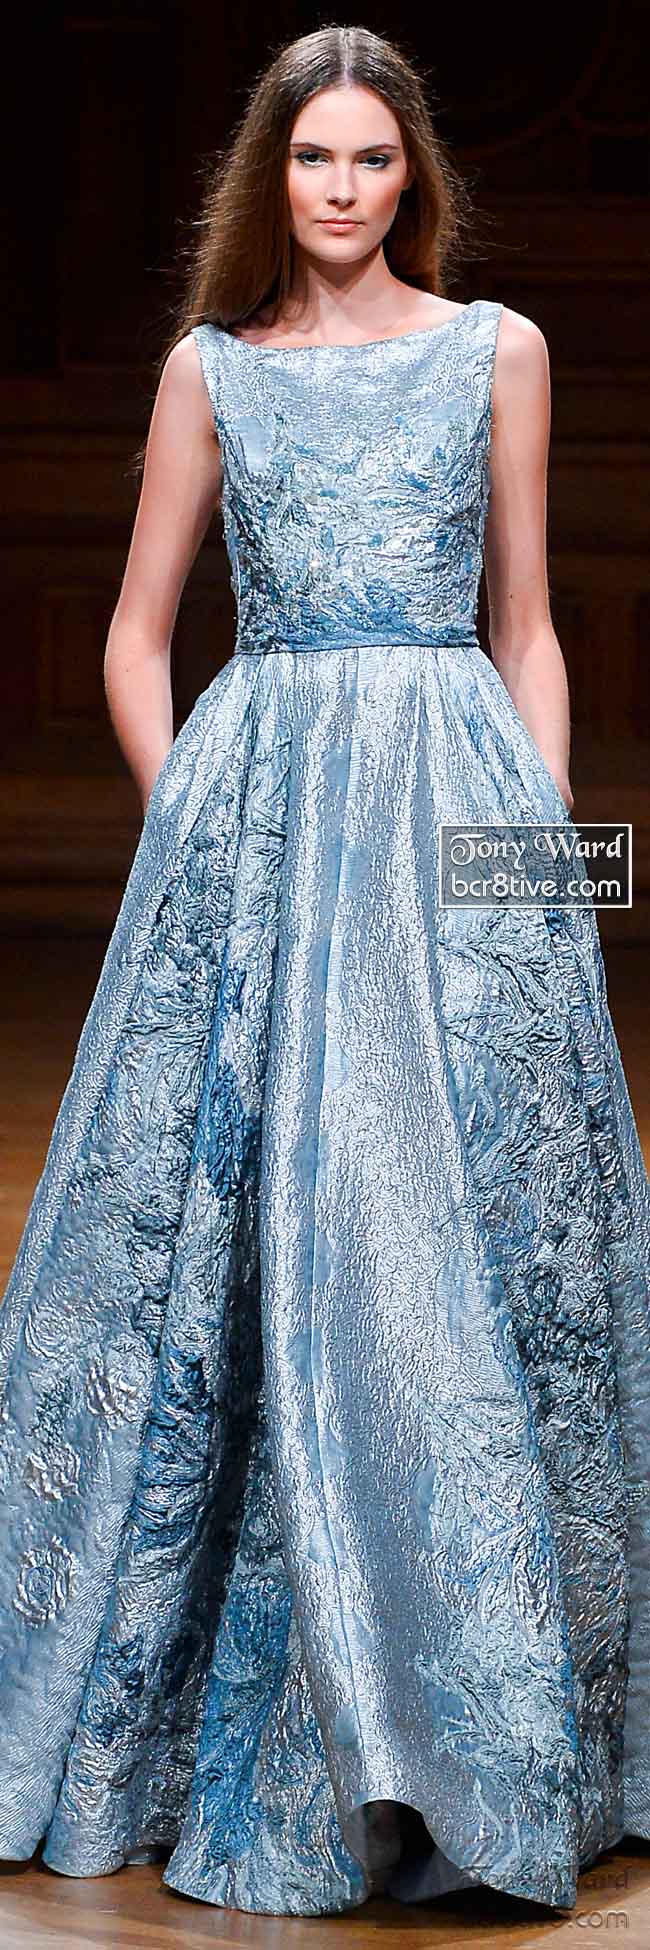 Metallic Embroidered Sky Blue Evening Gown